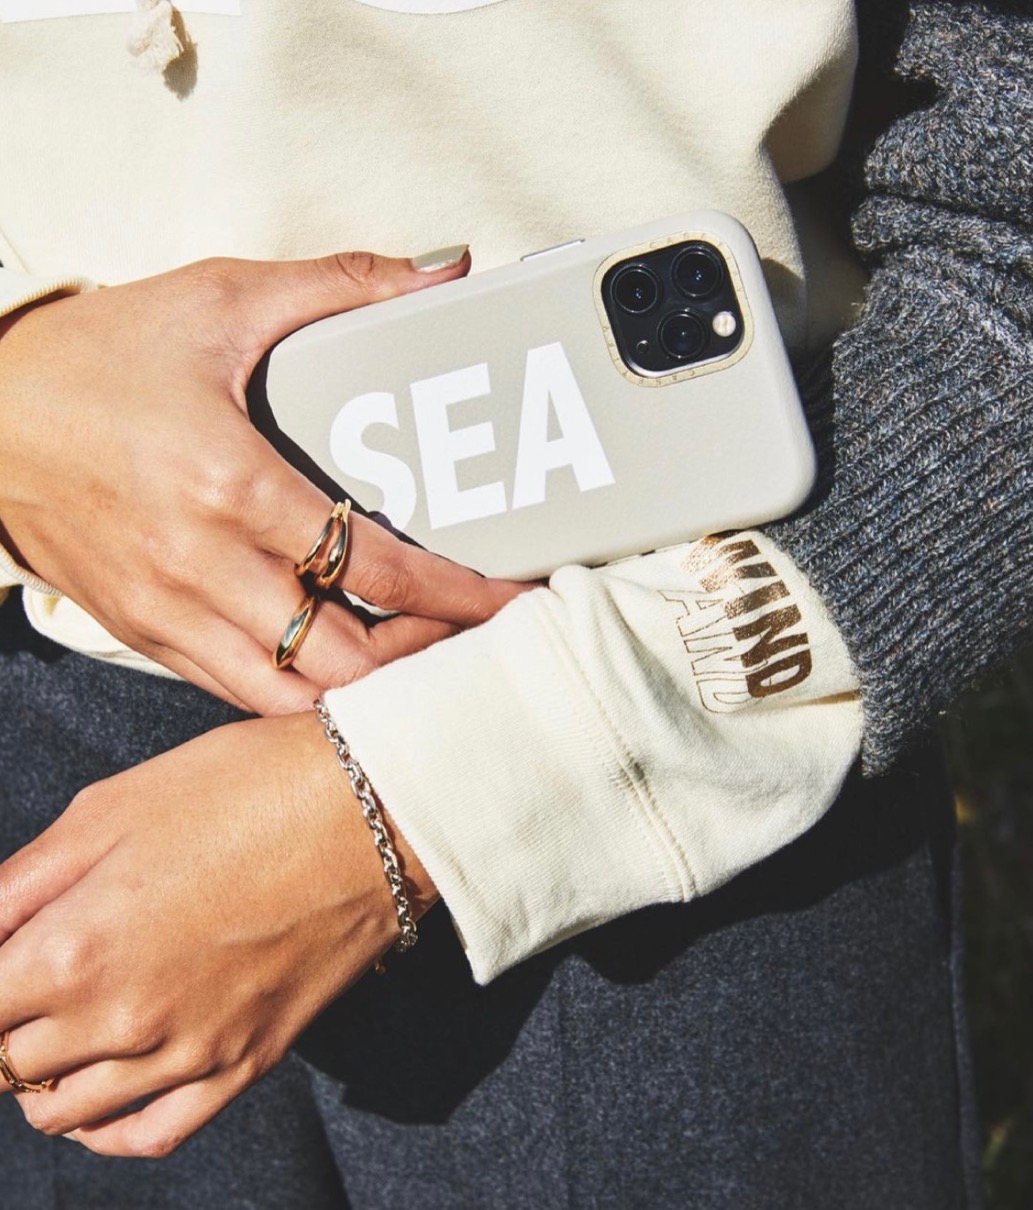 CASETIFY X wind and sea TOTE BAG Sand